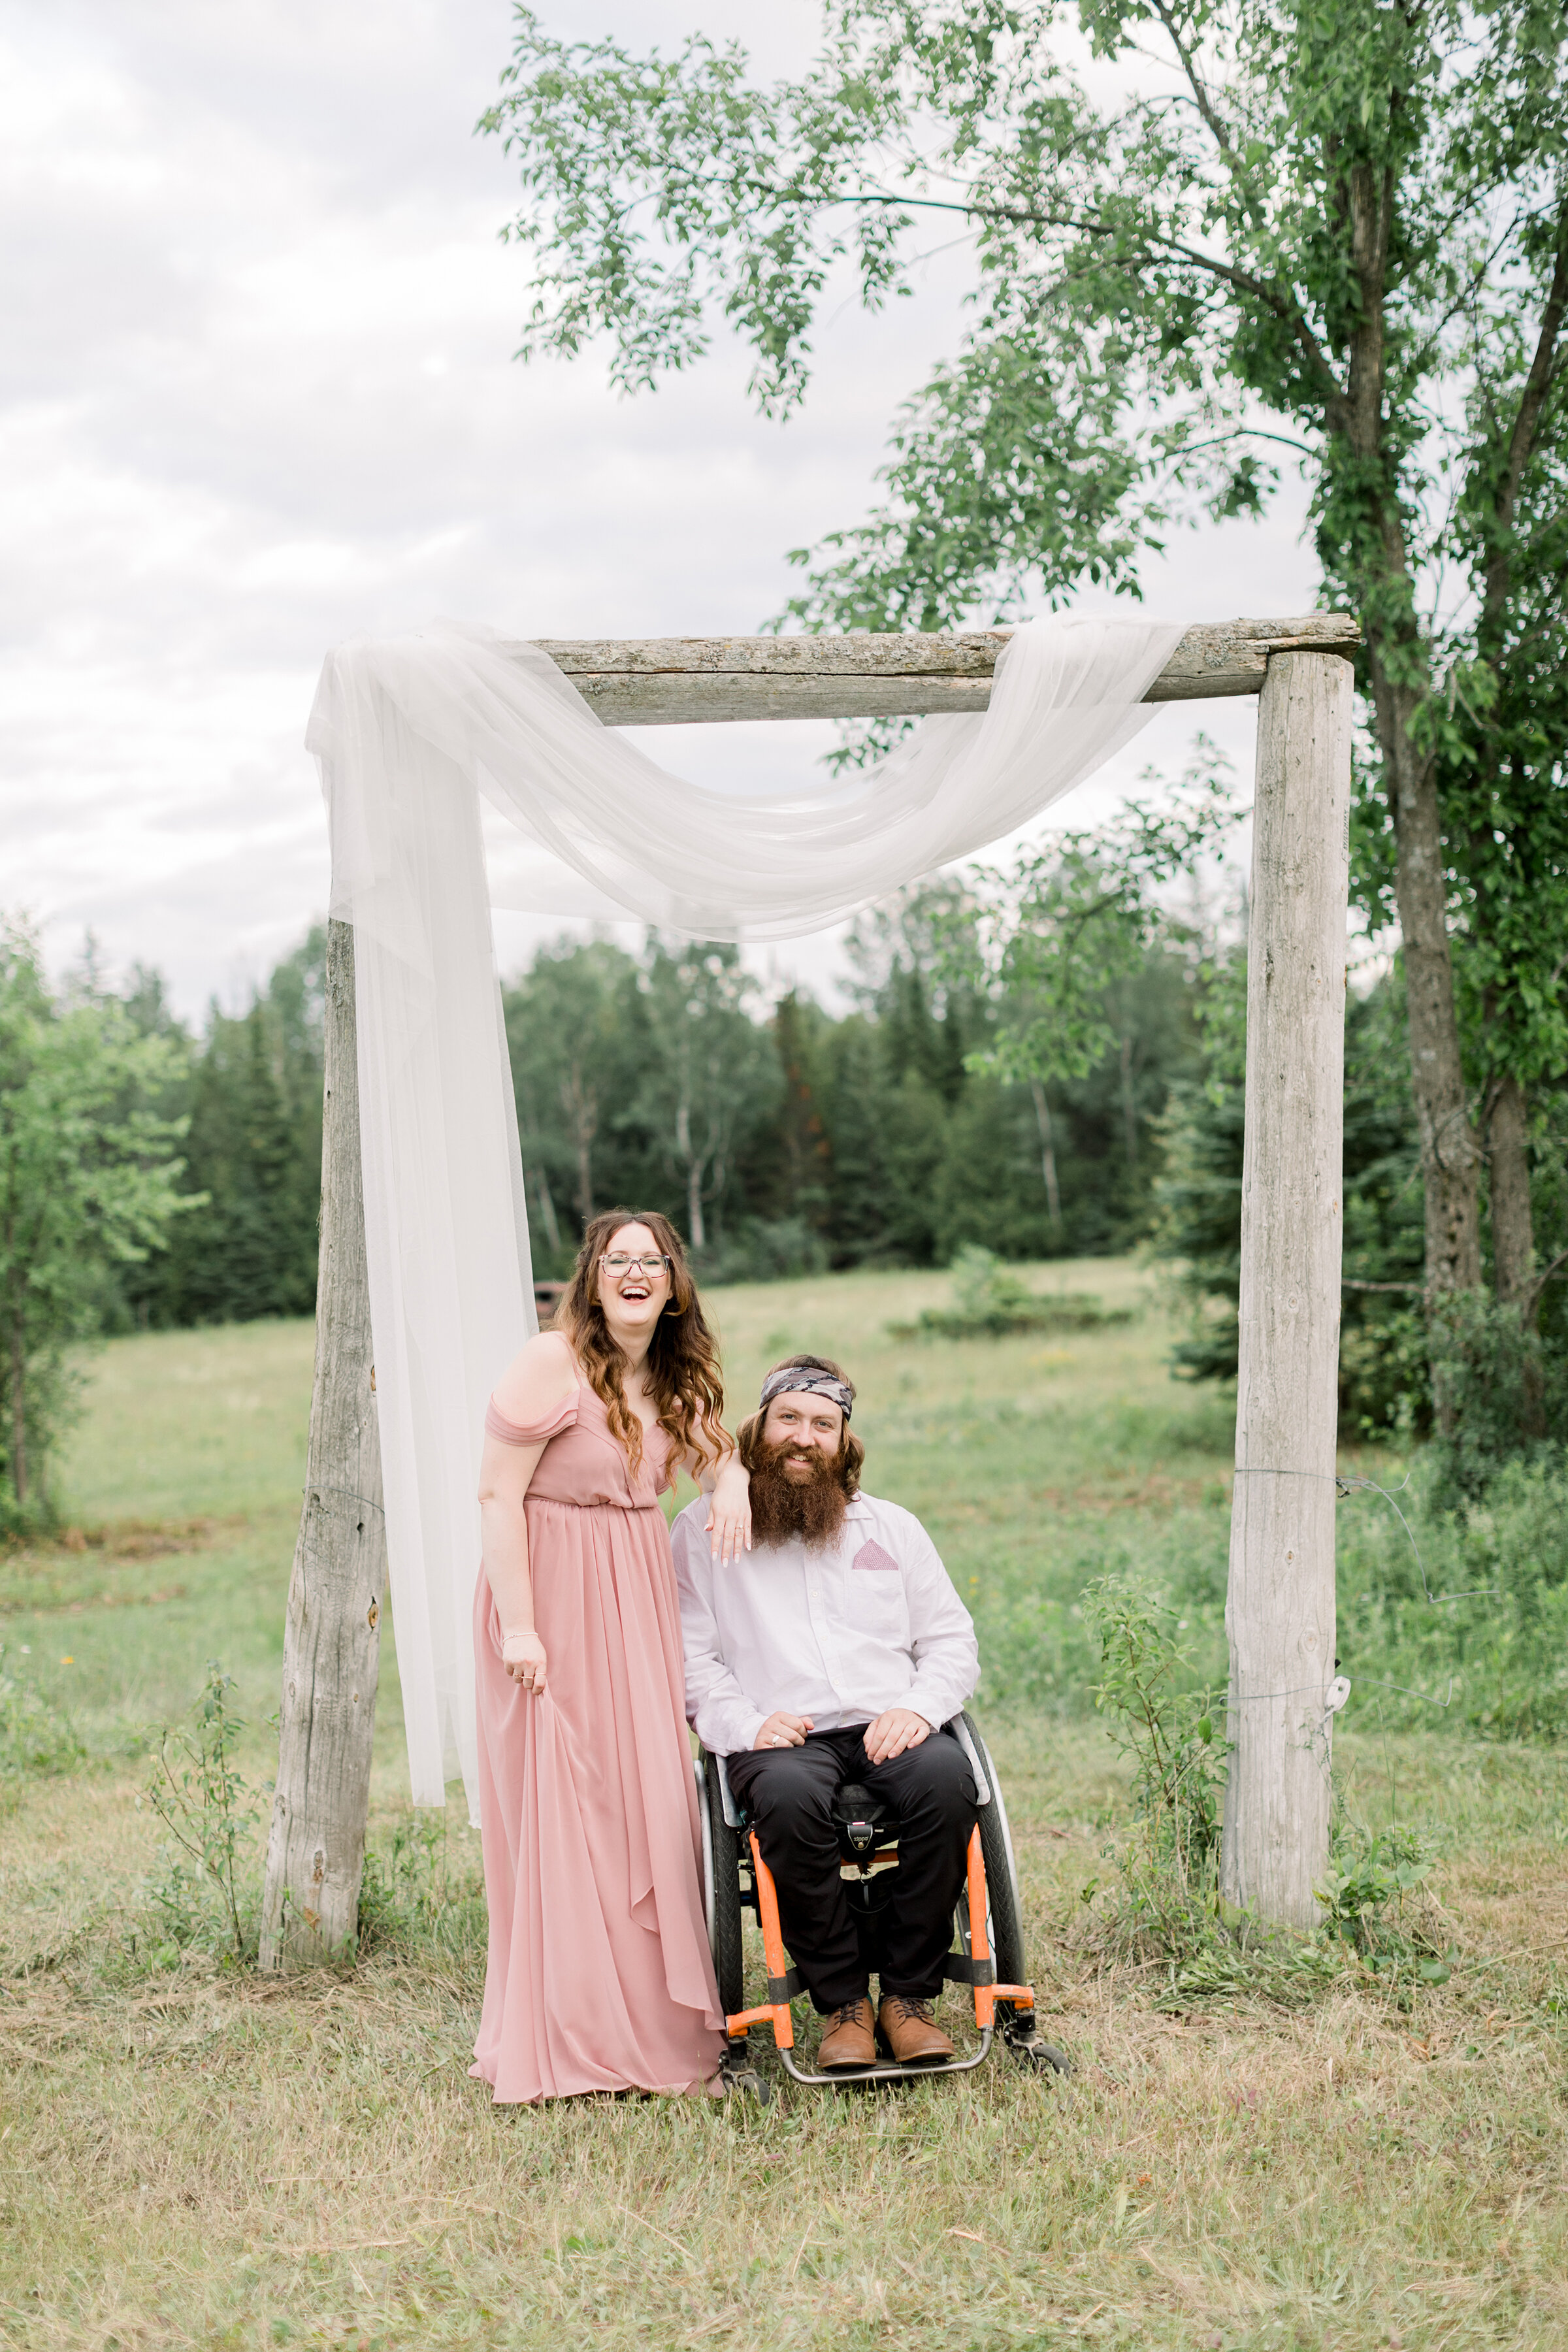  A couple sits and stands together under a beautiful rustic wedding arch in a stunning engagement session for a paraplegic couple. Chelsea Mason Photography couple goals Ontario Canada Smith Falls wedding arch inspiration ideas and goals simple and r